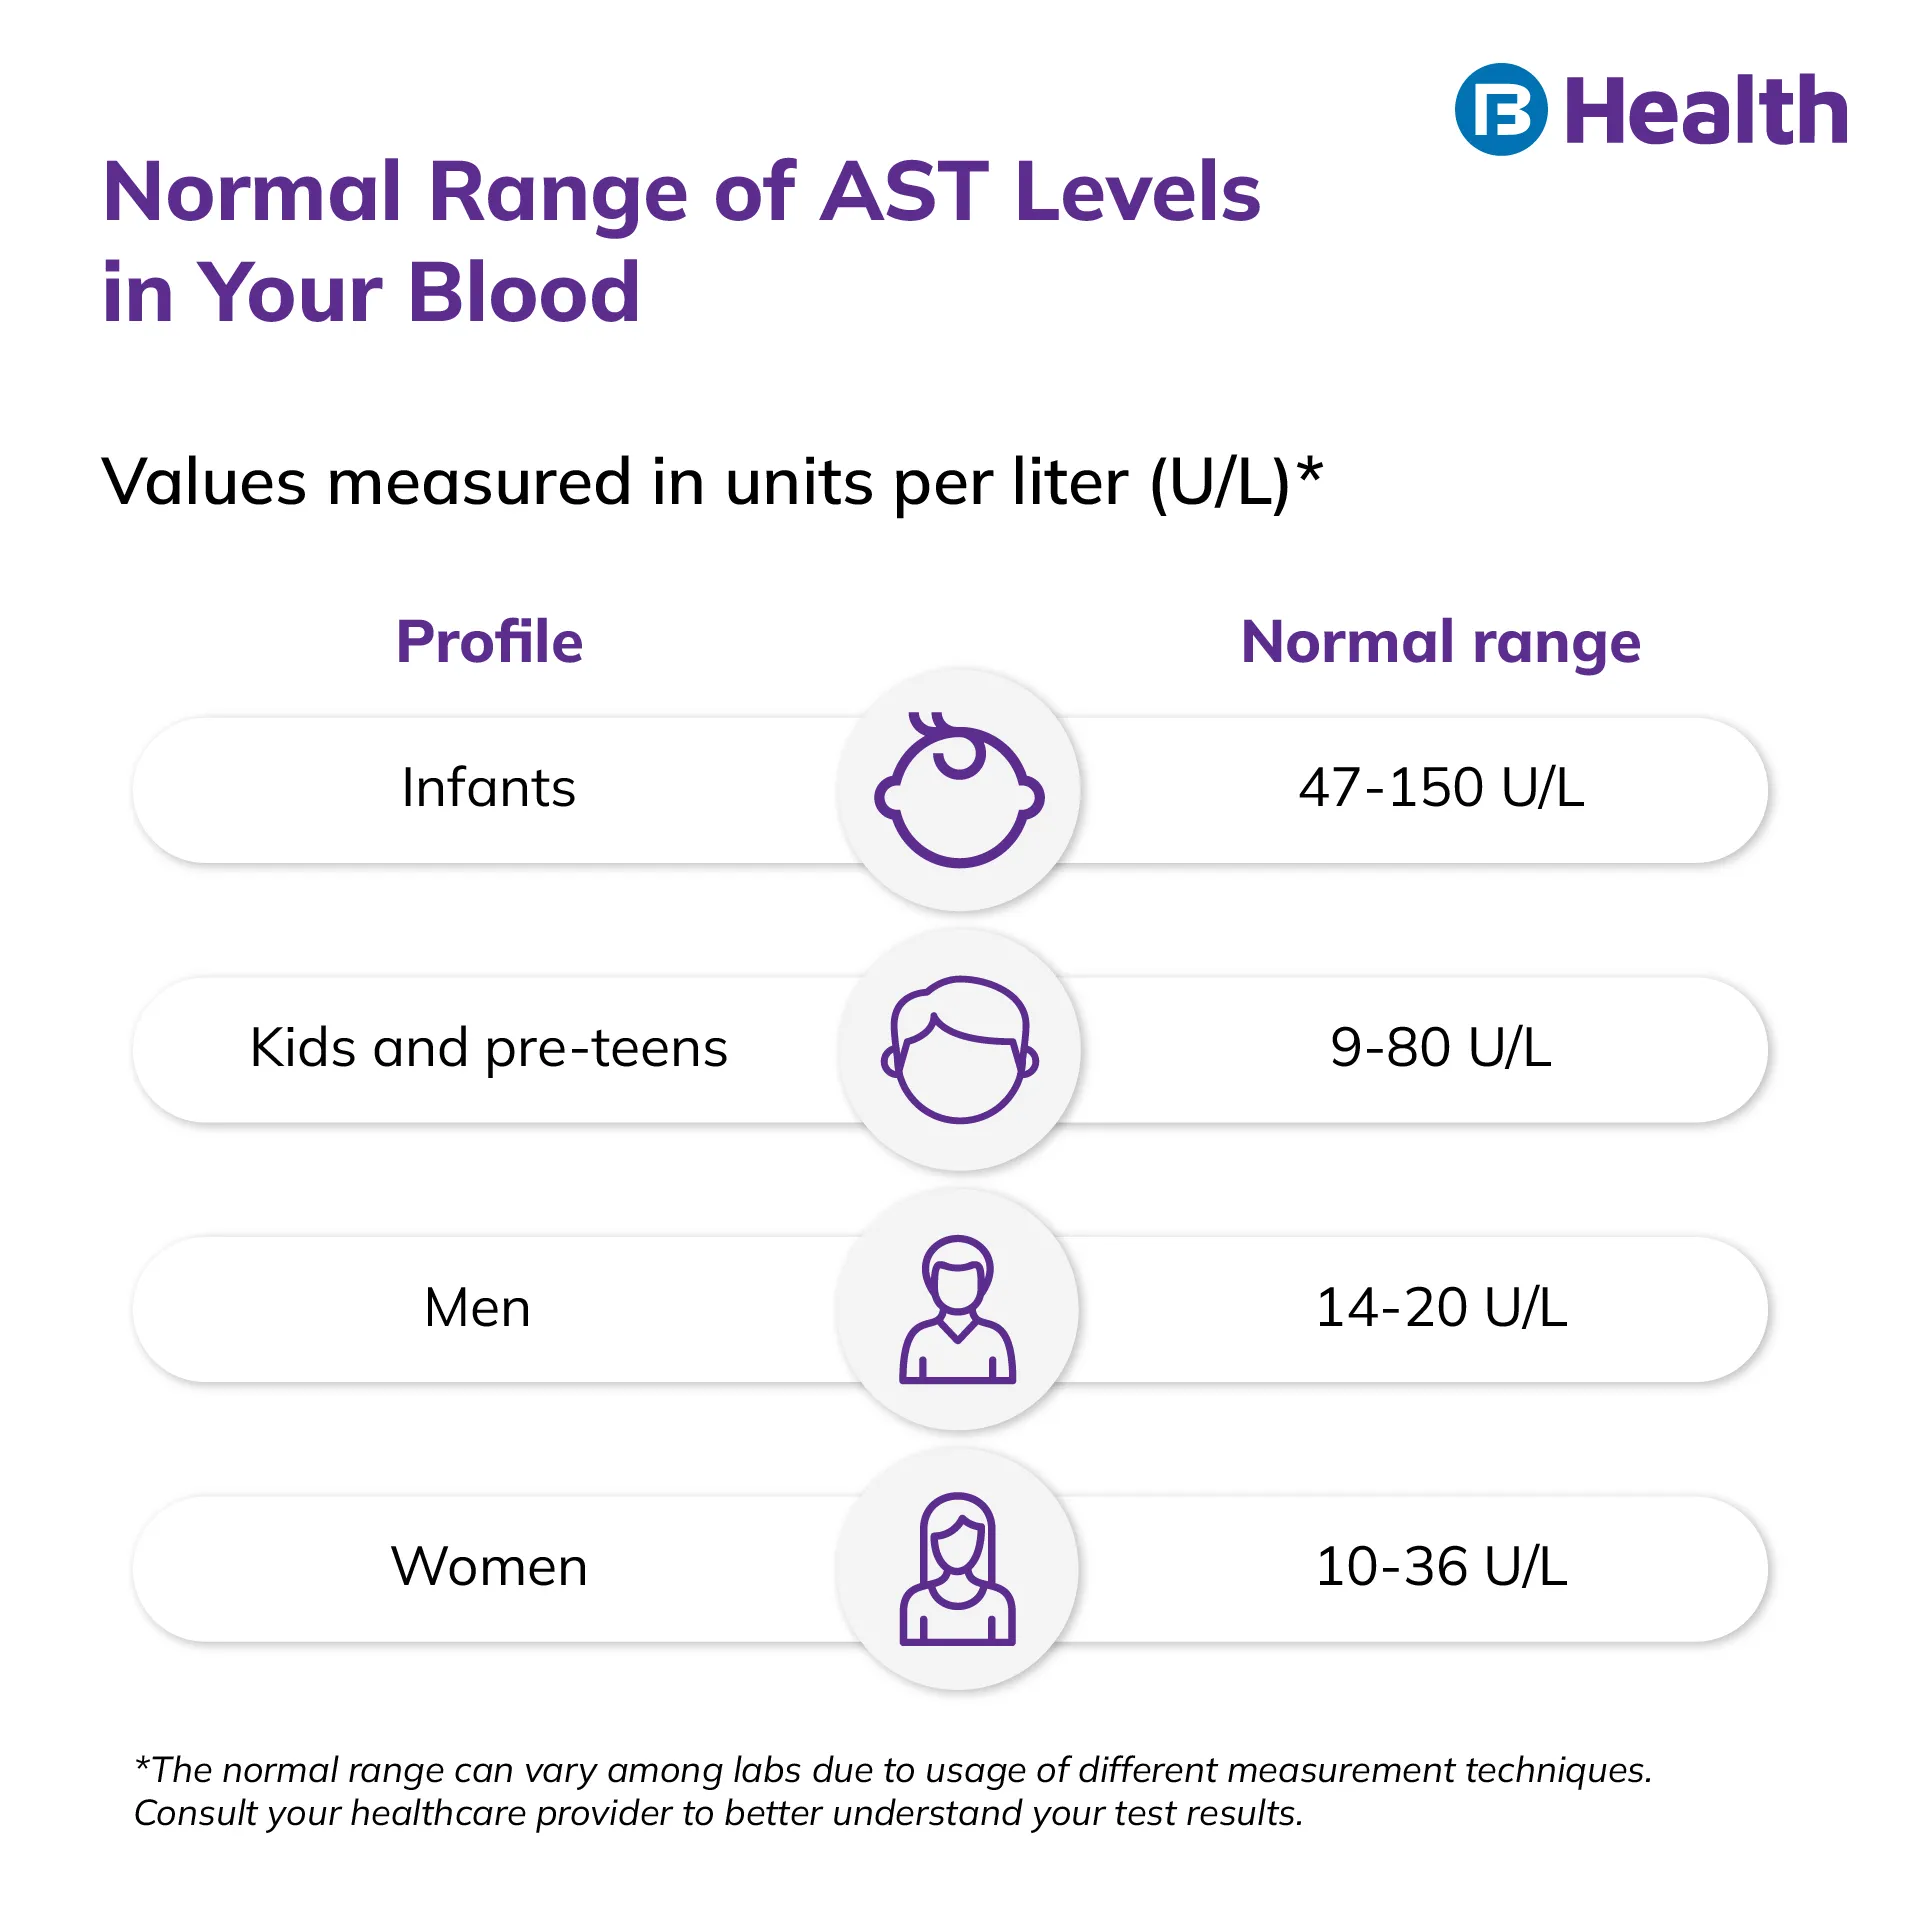 Normal range of AST levels in blood